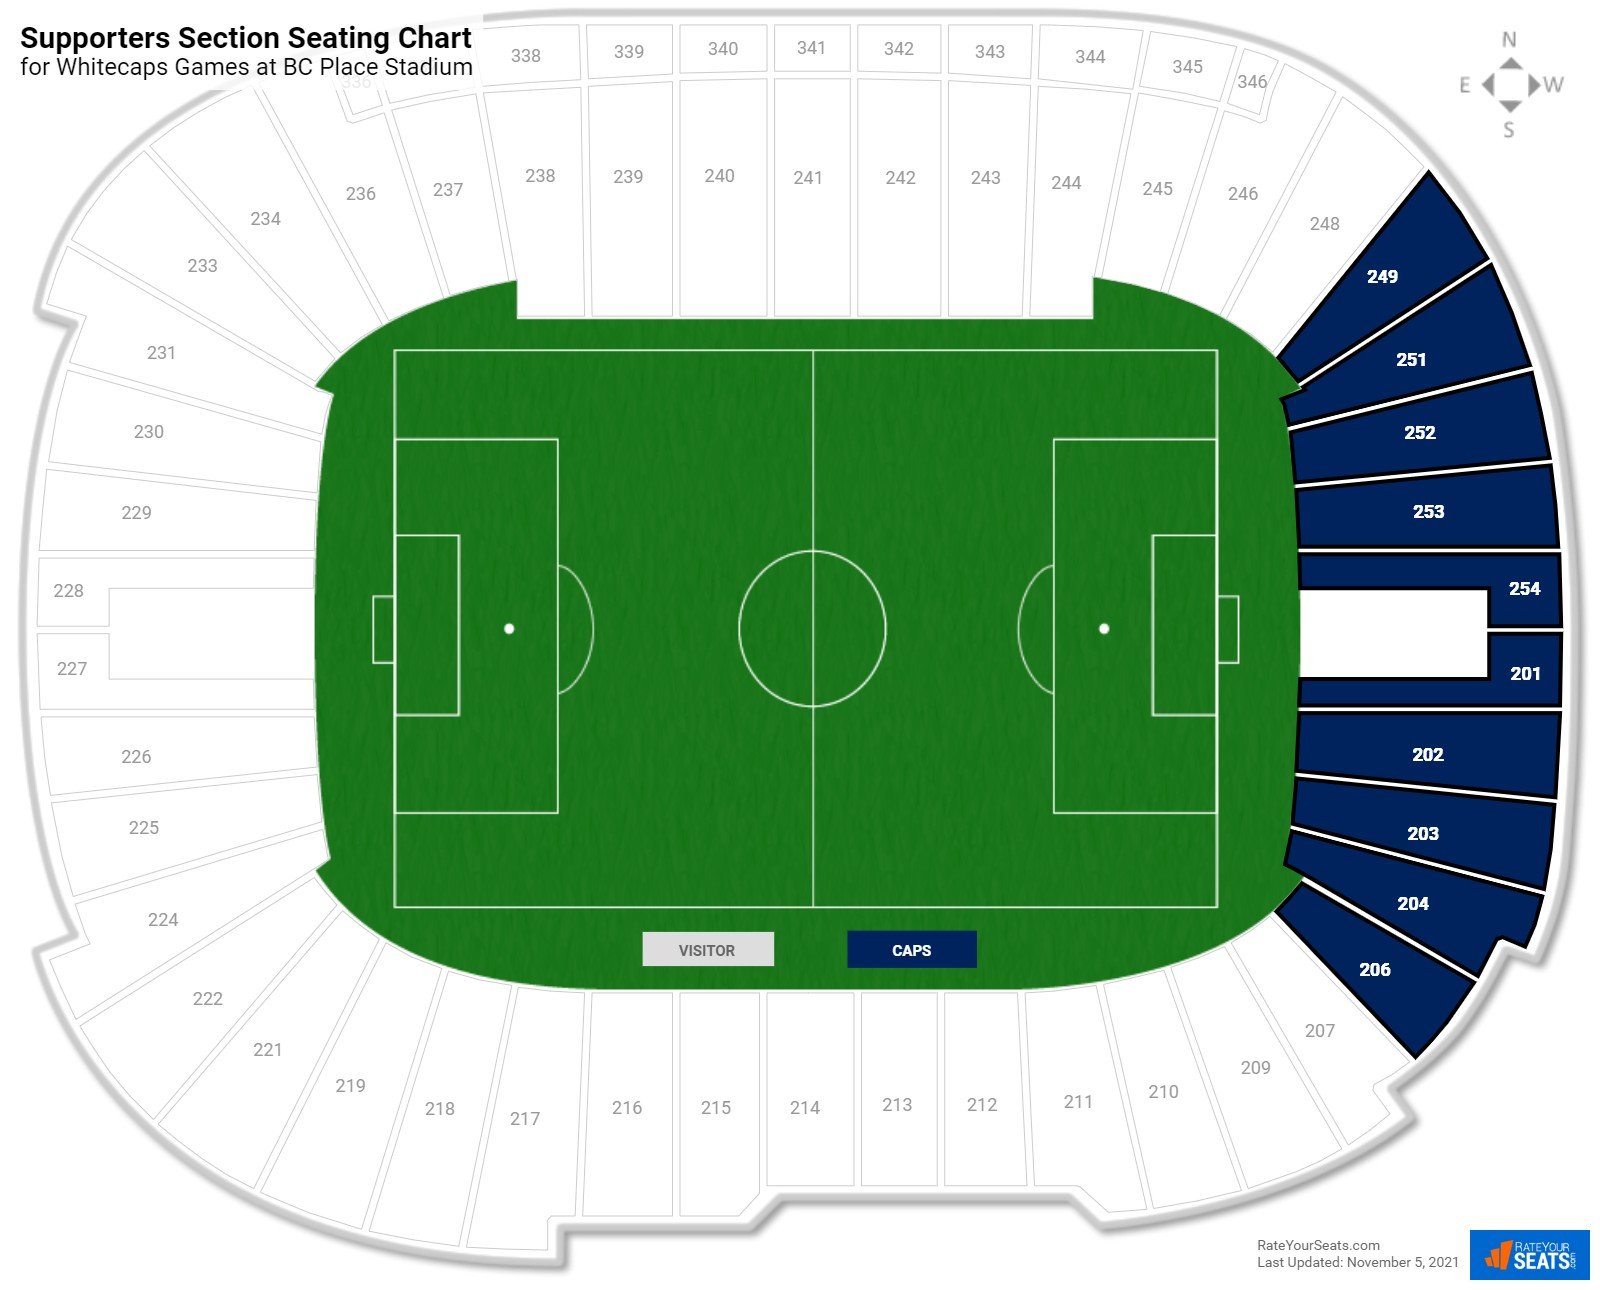 Whitecaps Supporters Section Seating Chart at BC Place Stadium